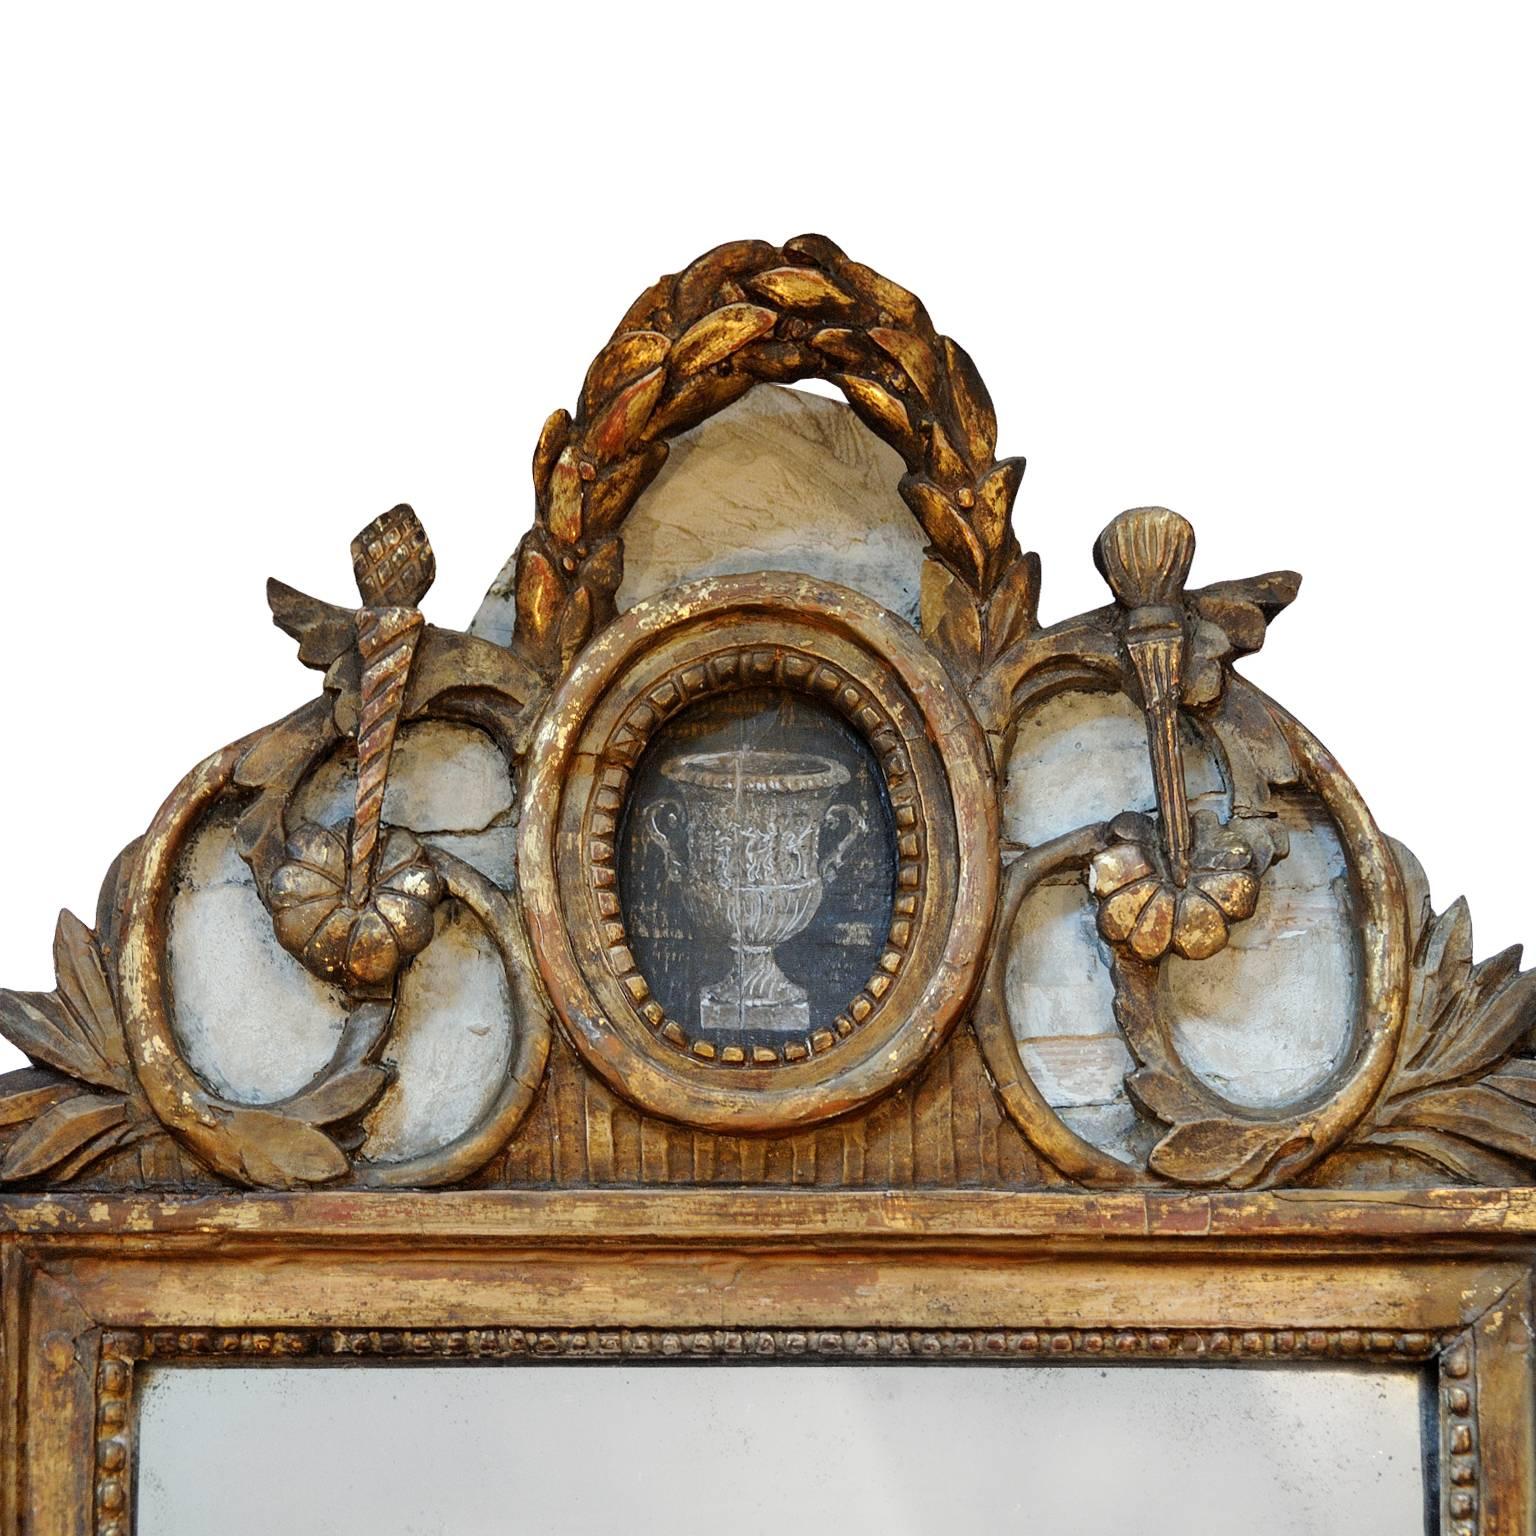 This is a highly charismatic and beautiful late 18th century French Louis XVI period painted and gilt mirror, featuring its original mirror plate complete with lovely foxing, circa 1780.